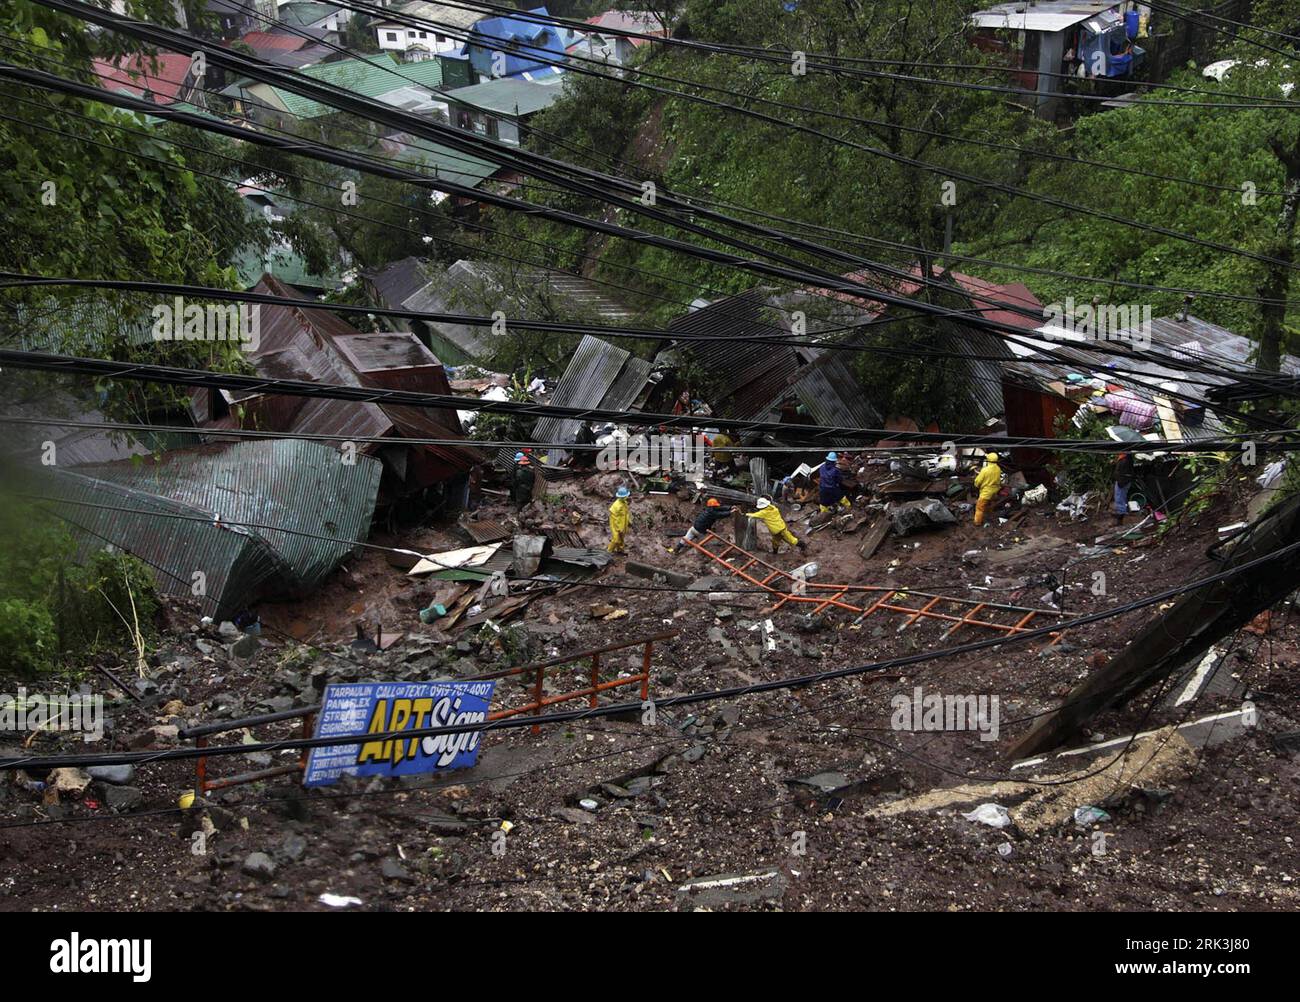 Bildnummer: 53521046  Datum: 09.10.2009  Copyright: imago/Xinhua (091009) -- Manila, Oct. 9, 2009 (Xinhua) -- Buildings are buried by mudslide in Baguio City, in northern Philippines, Oct. 9, 2009. At least 43 persons were killed and 150 are still missing in Central and Northern Luzon in northern Philippines affected by flooding and mudslide in the wake of Typhoon Pepeng ( Parma ). (Xinhua/Dave Leprozo) (zw) (3)PHILIPPINES-PEPENG-AFTERMATH PUBLICATIONxNOTxINxCHN Philippinen Naturkatastrophen Taifun Pepeng Zerstörung Premiumd kbdig xub 2009 quer o0 Schäden  o00 Erdrutsch    Bildnummer 53521046 Stock Photo